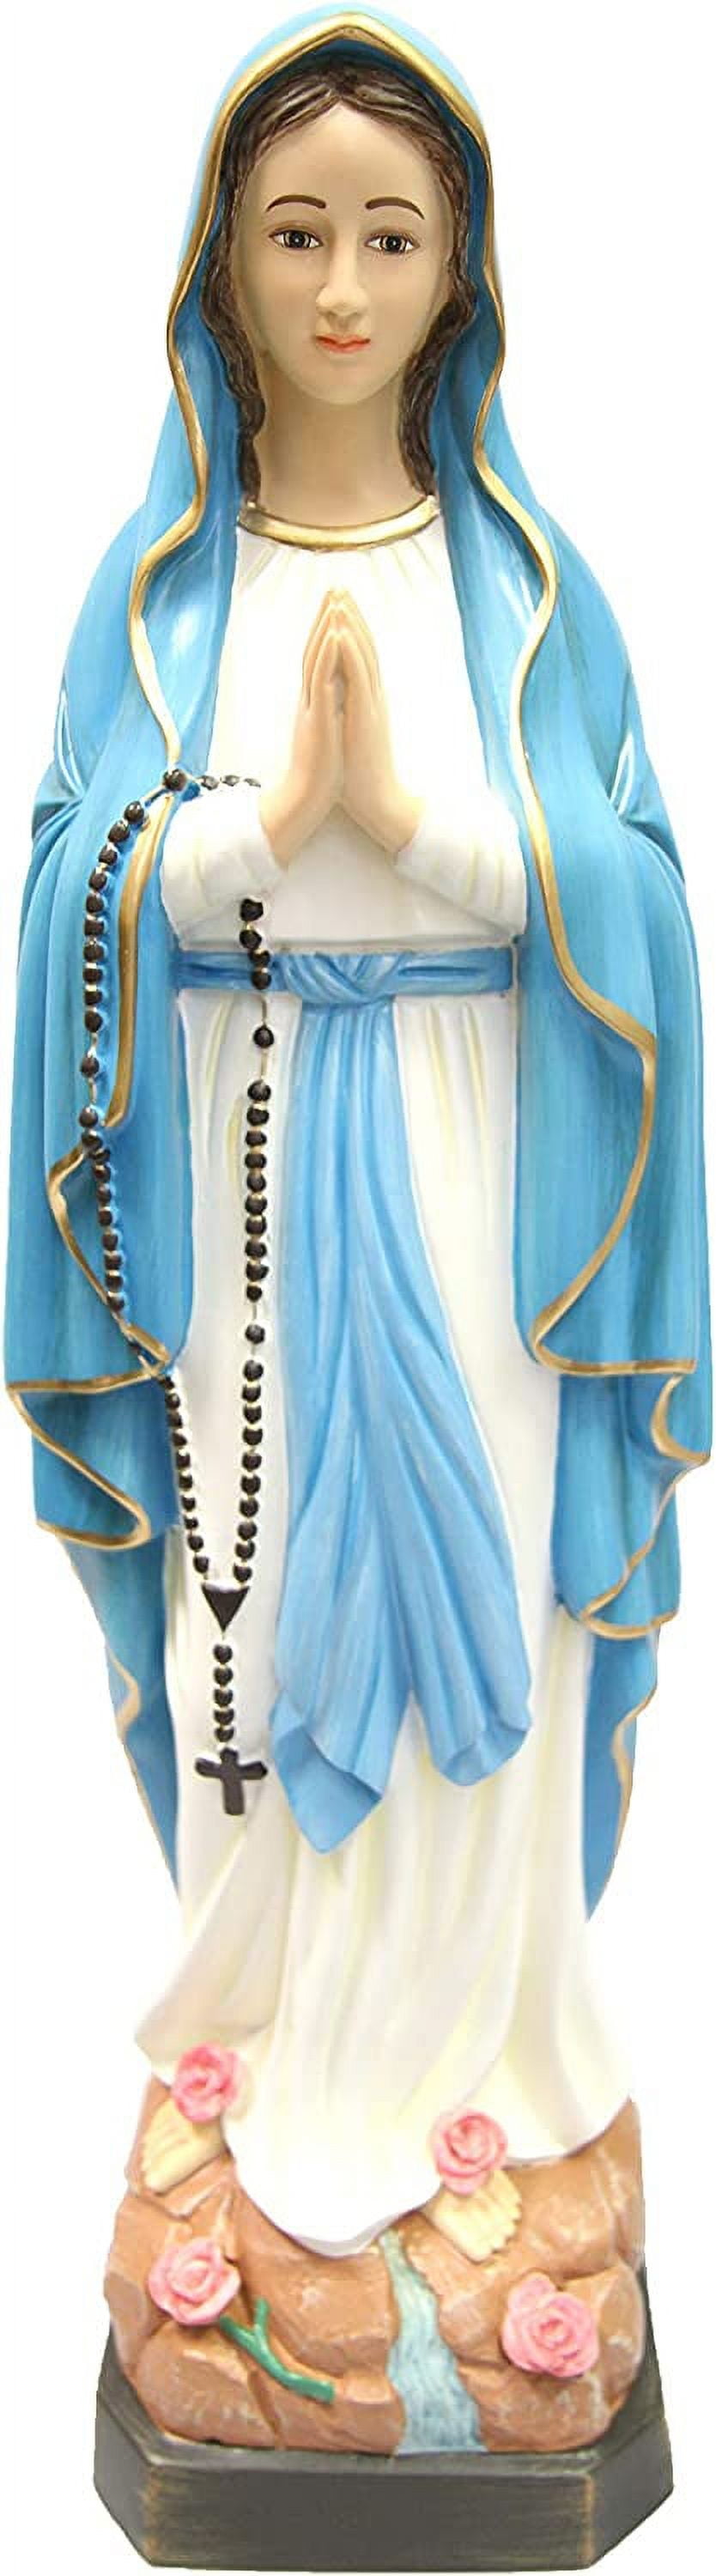 27 Inch Our Lady Of Lourdes Statue Made In Italy Indoor Outdoor Garden ...